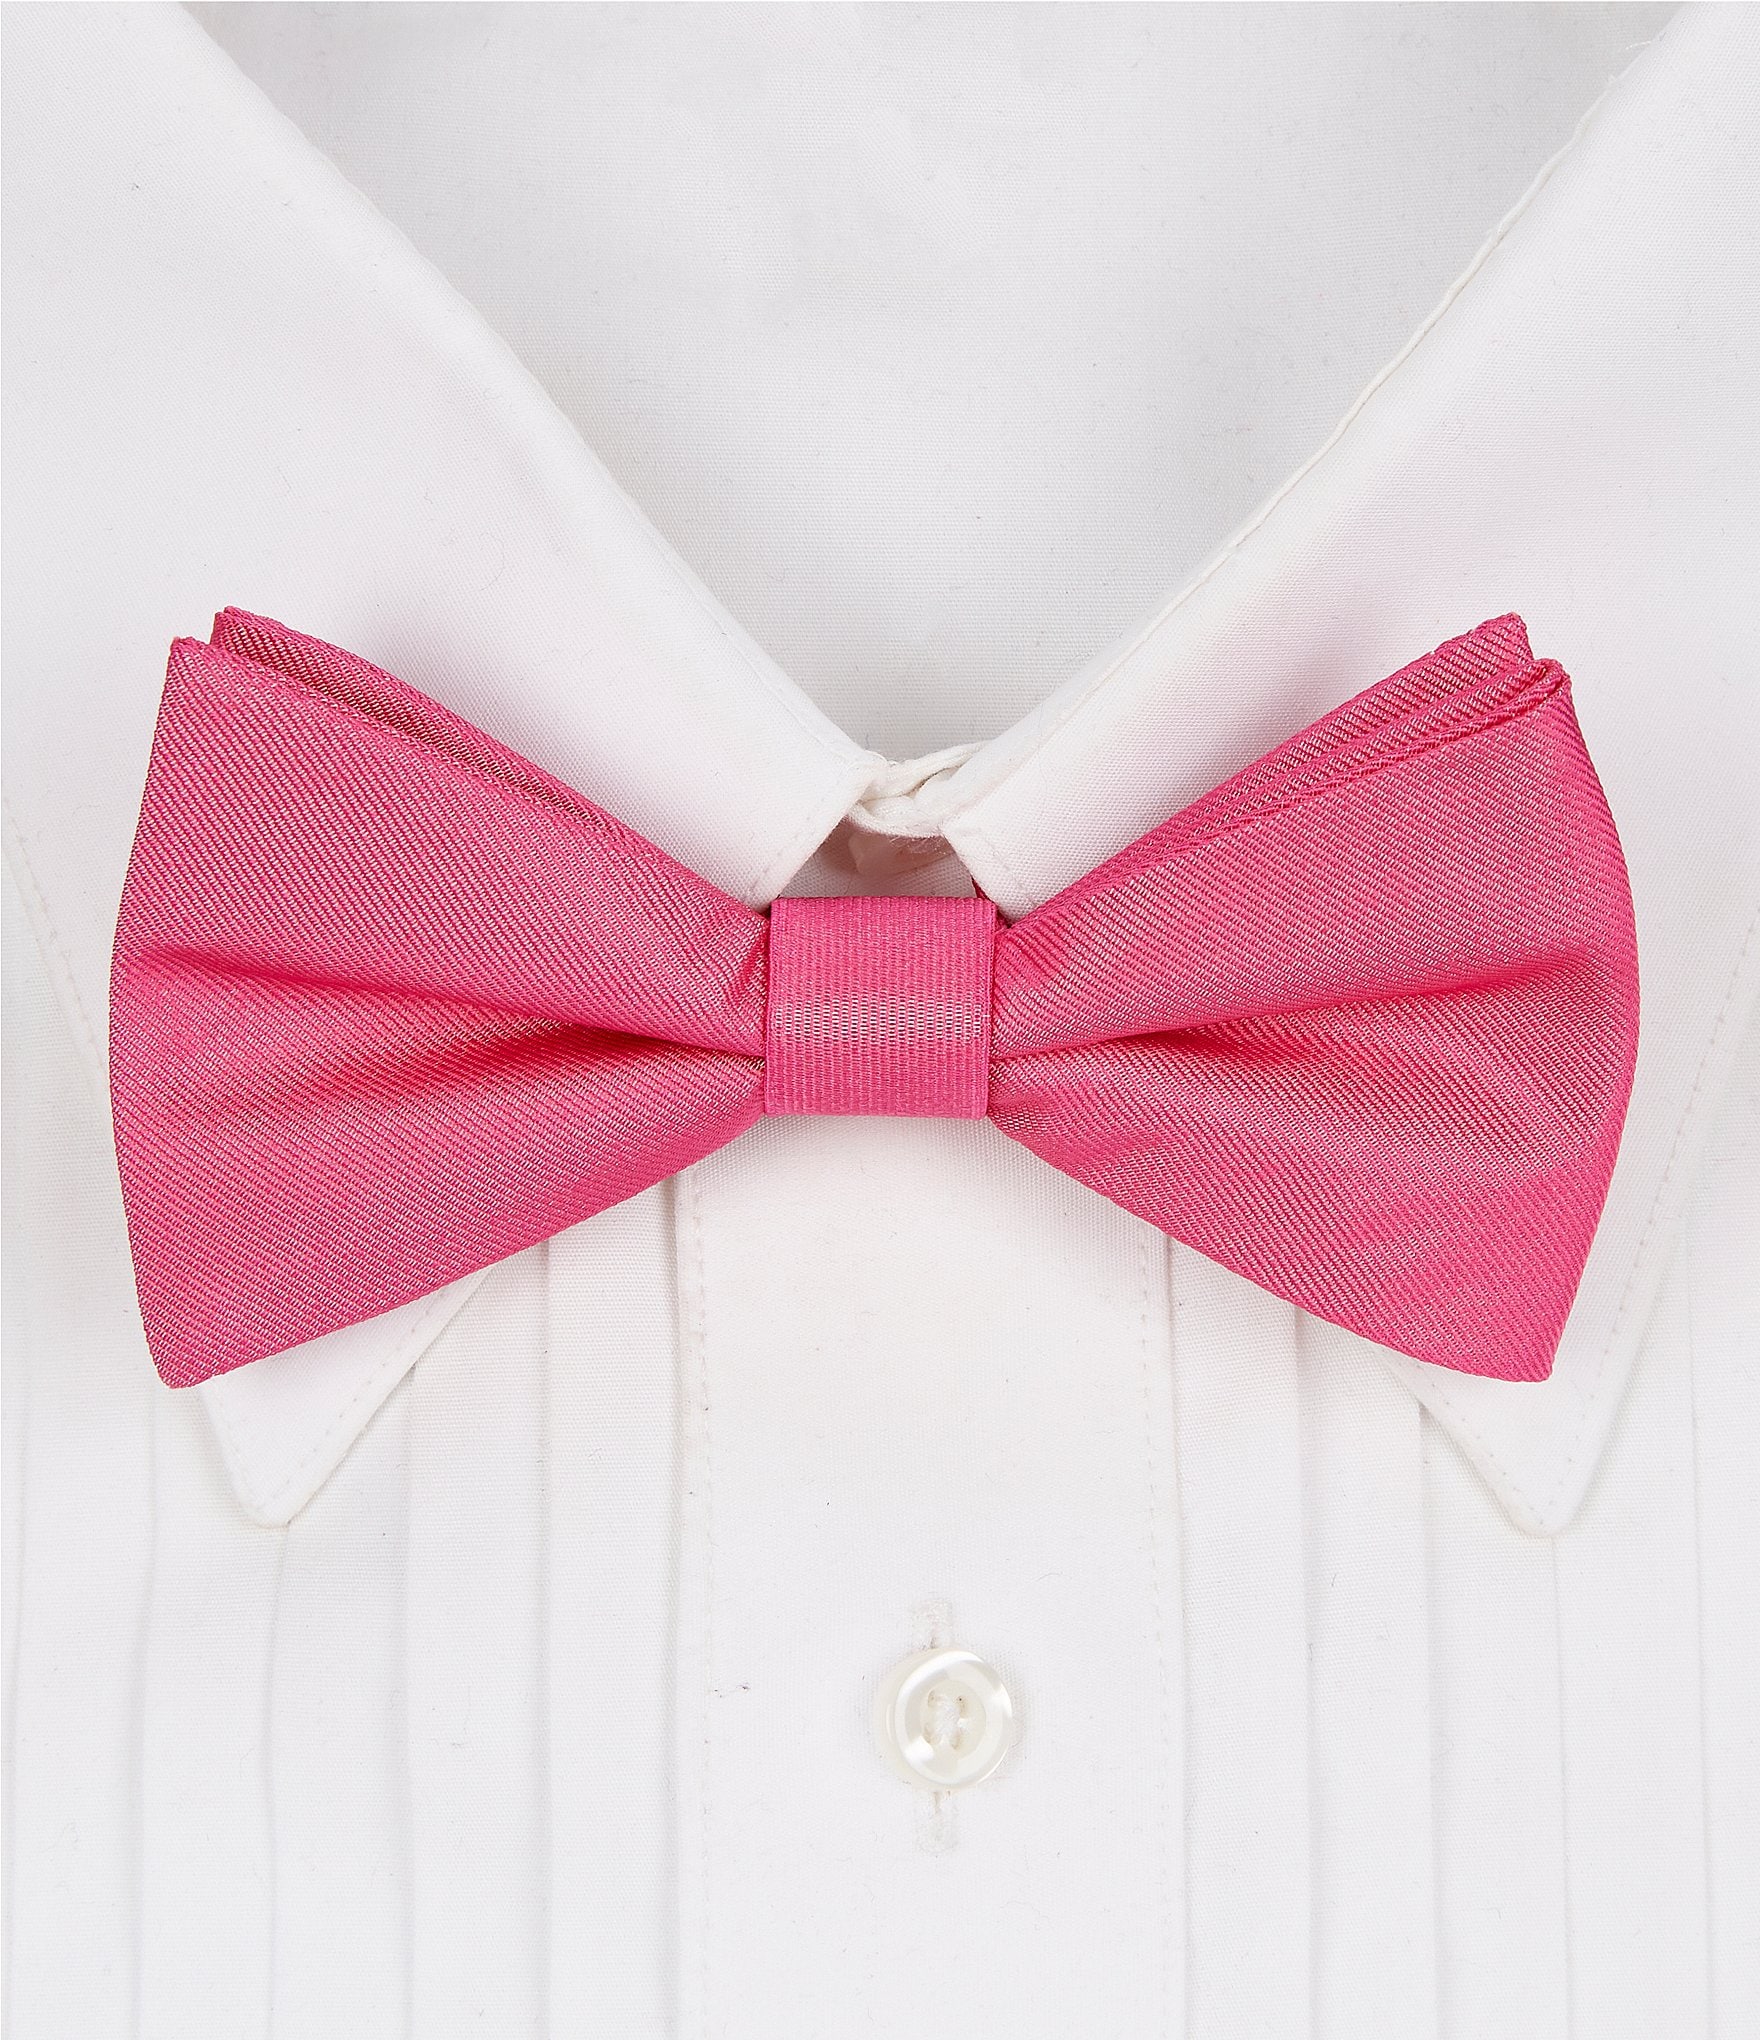 Hot Pink Basic Pre-Tied Bow Tie